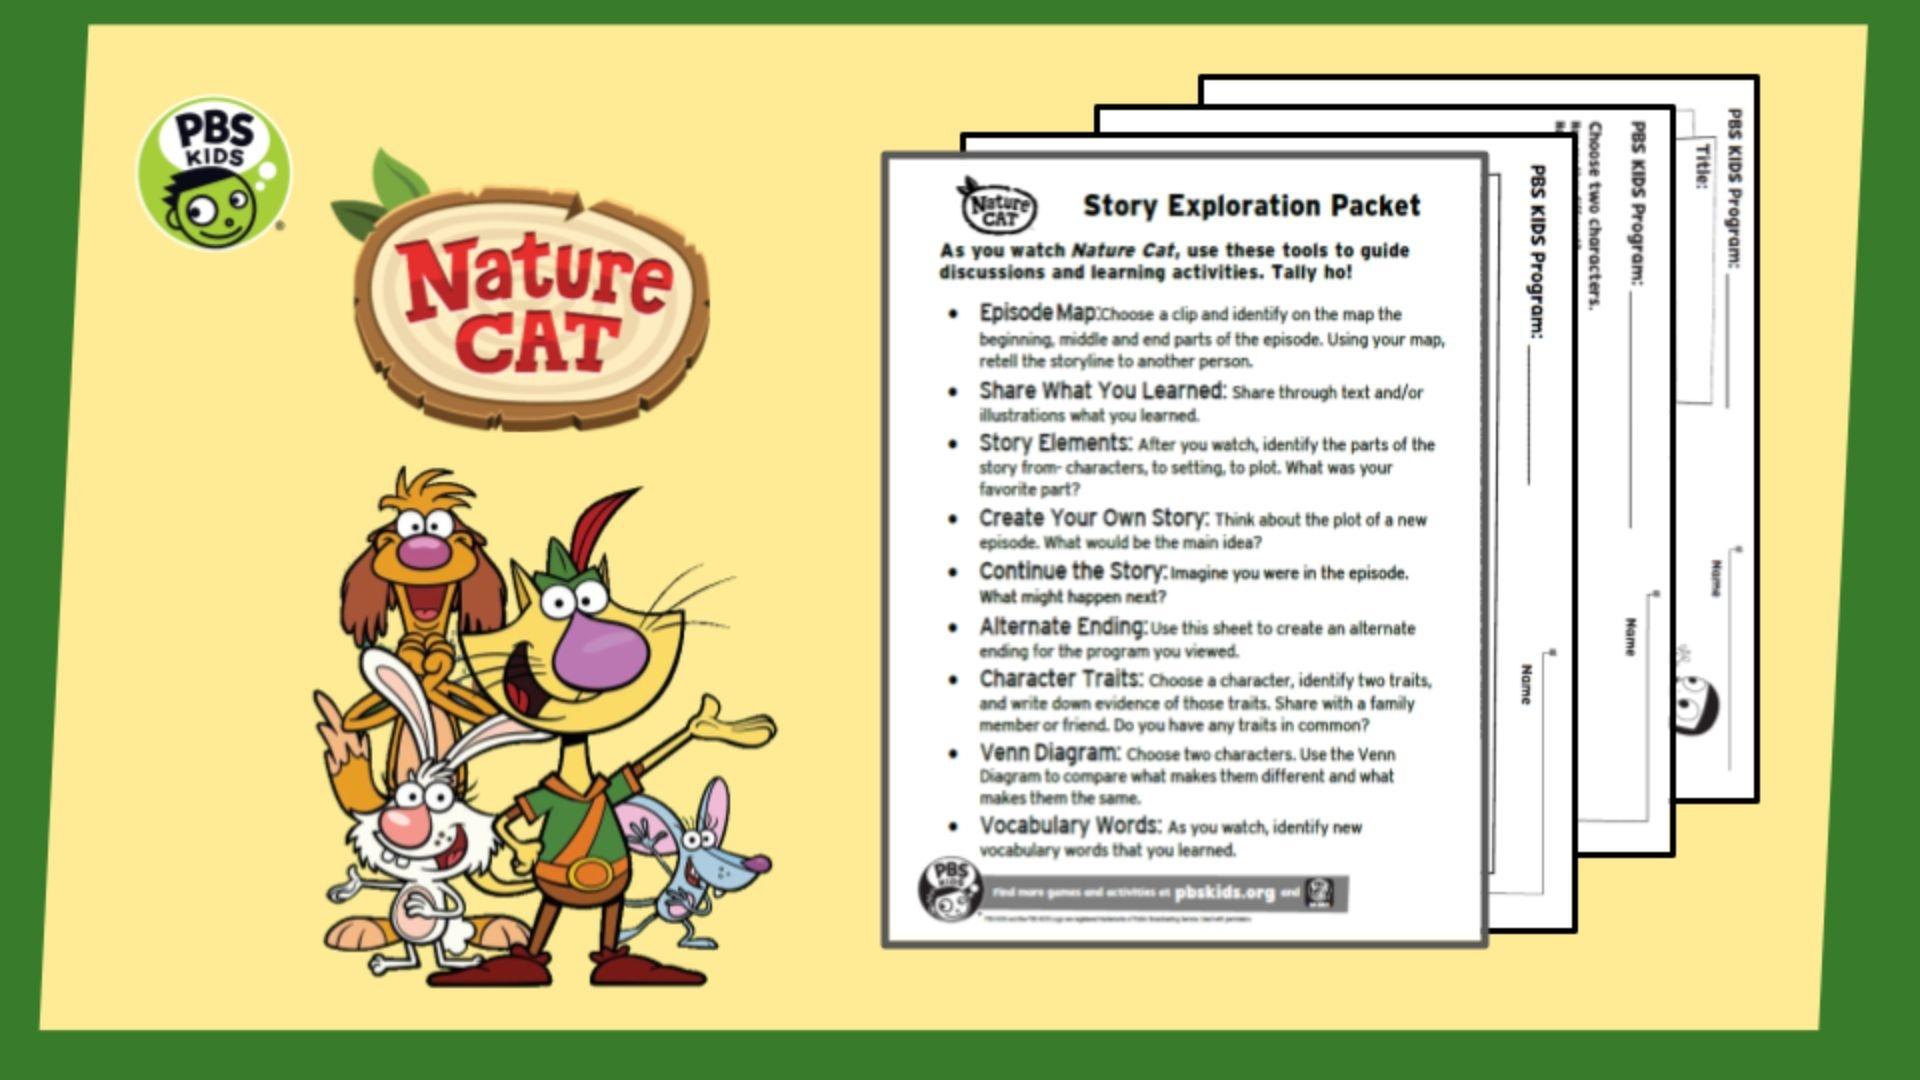 The Nature Cat crew presents a Story Exploration Packet.